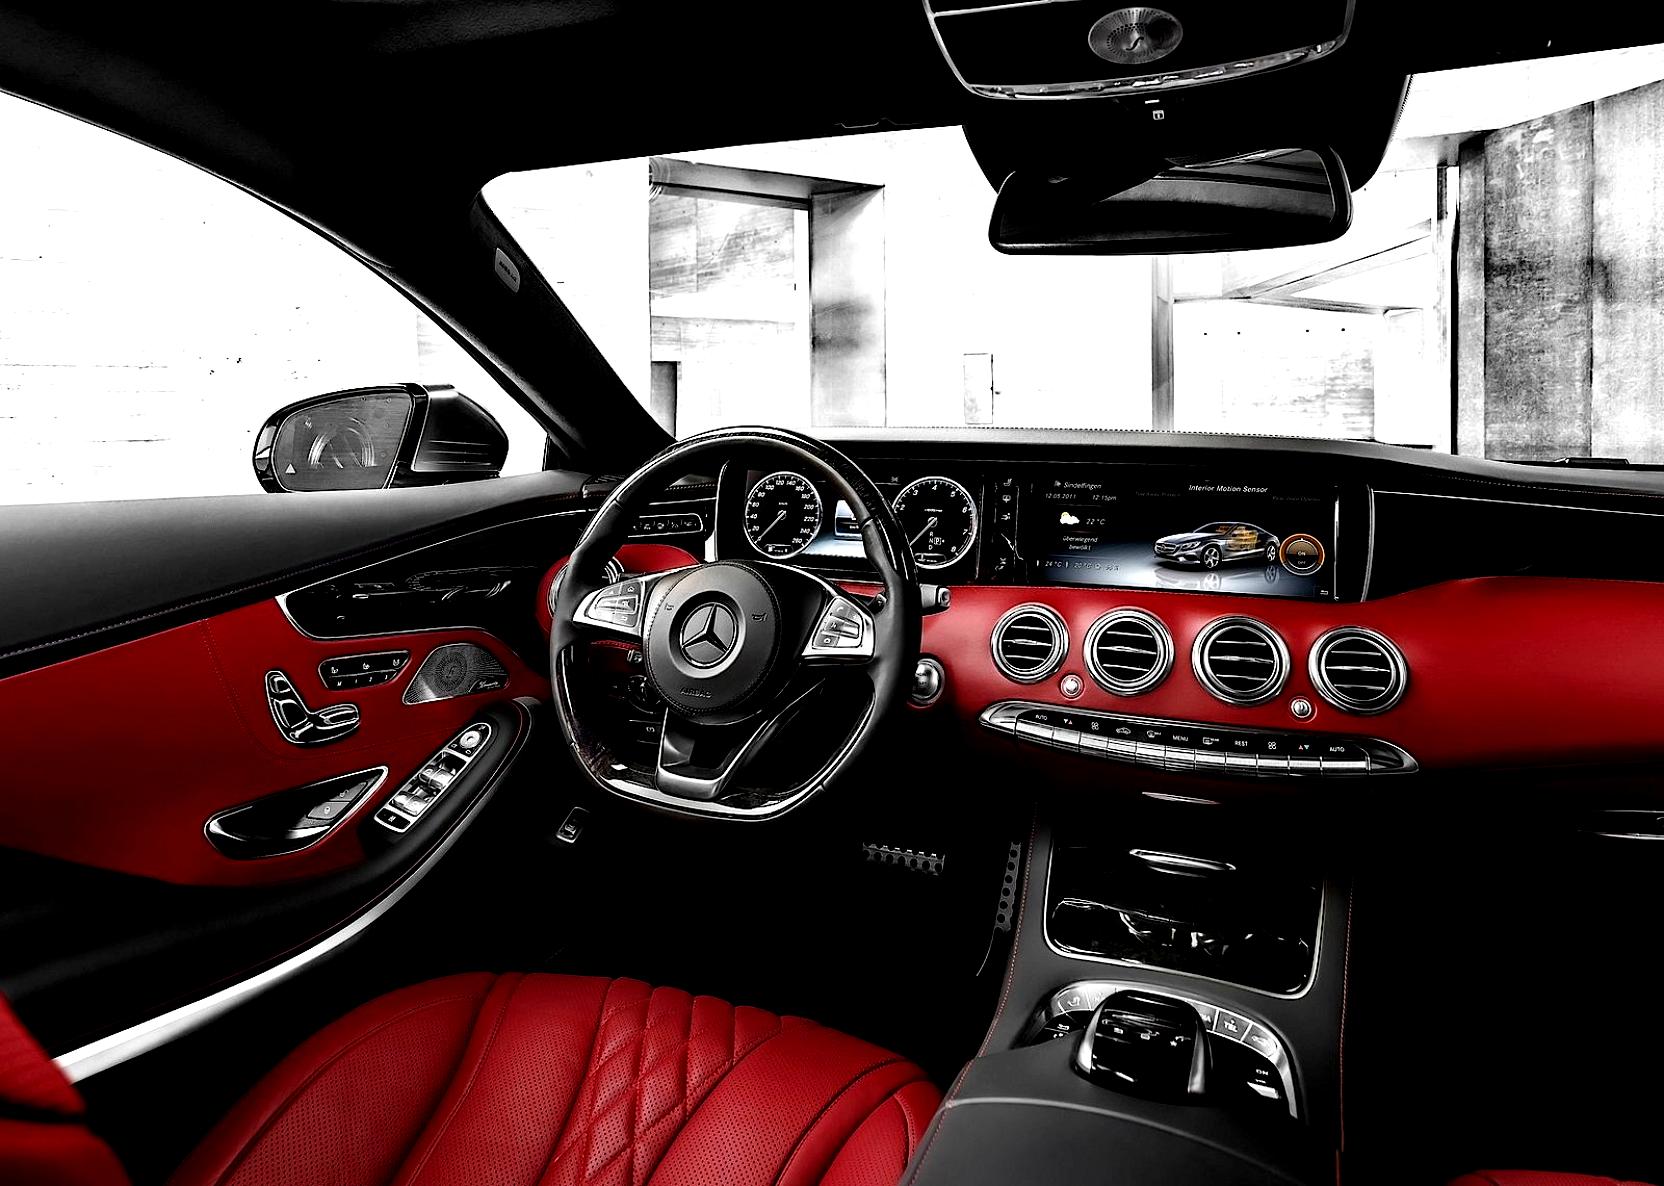 Mercedes Benz S 63 AMG Coupe 2014 #66